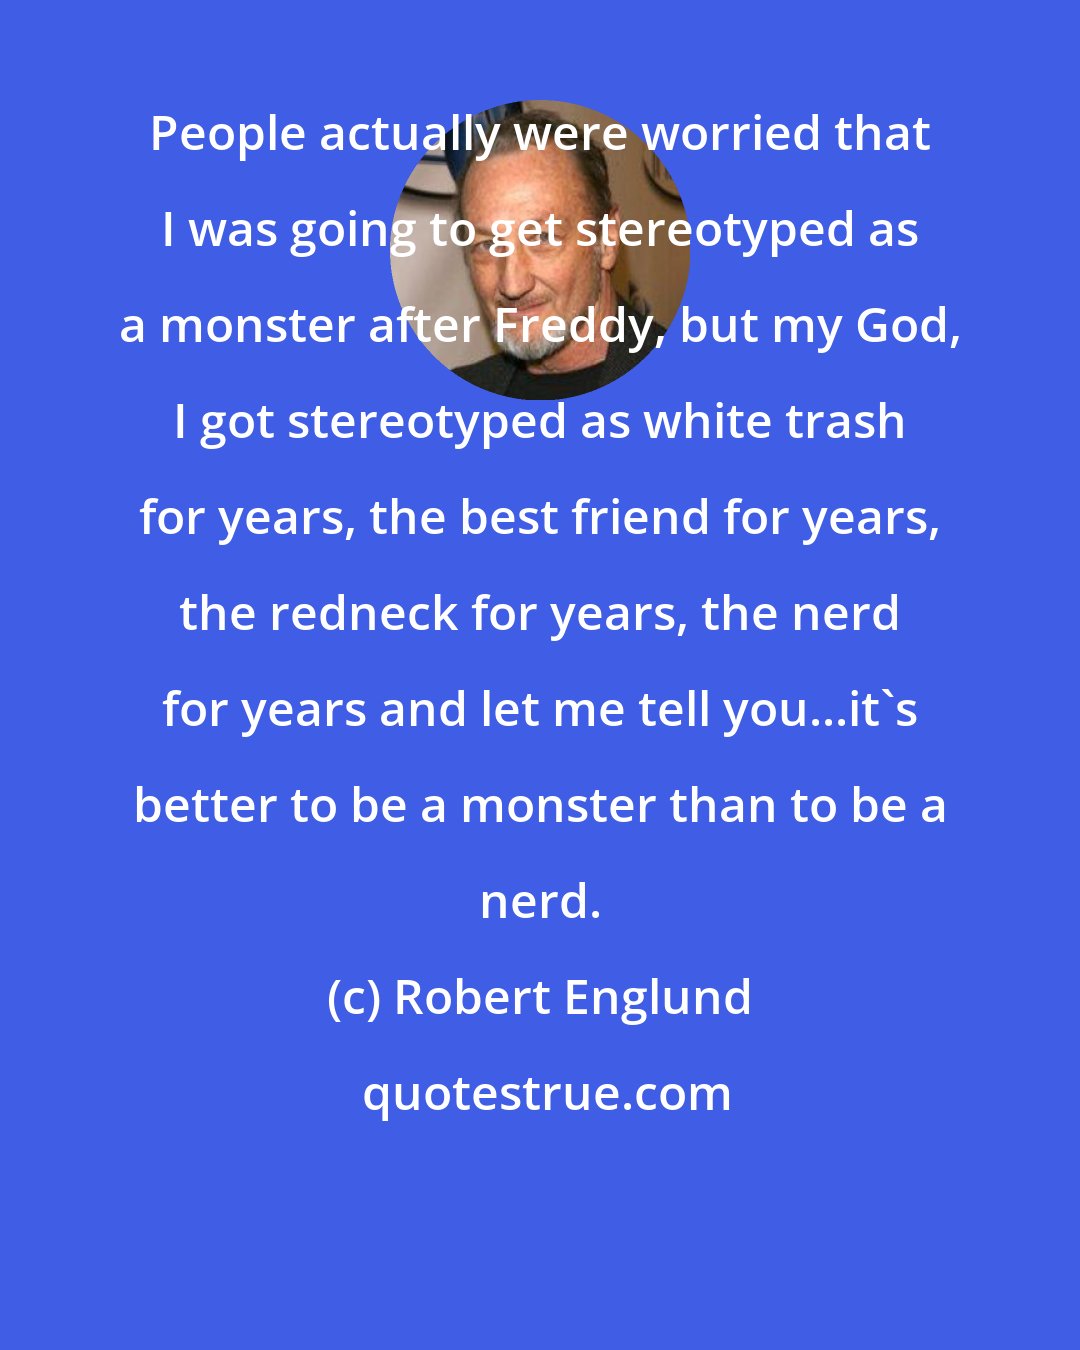 Robert Englund: People actually were worried that I was going to get stereotyped as a monster after Freddy, but my God, I got stereotyped as white trash for years, the best friend for years, the redneck for years, the nerd for years and let me tell you...it's better to be a monster than to be a nerd.